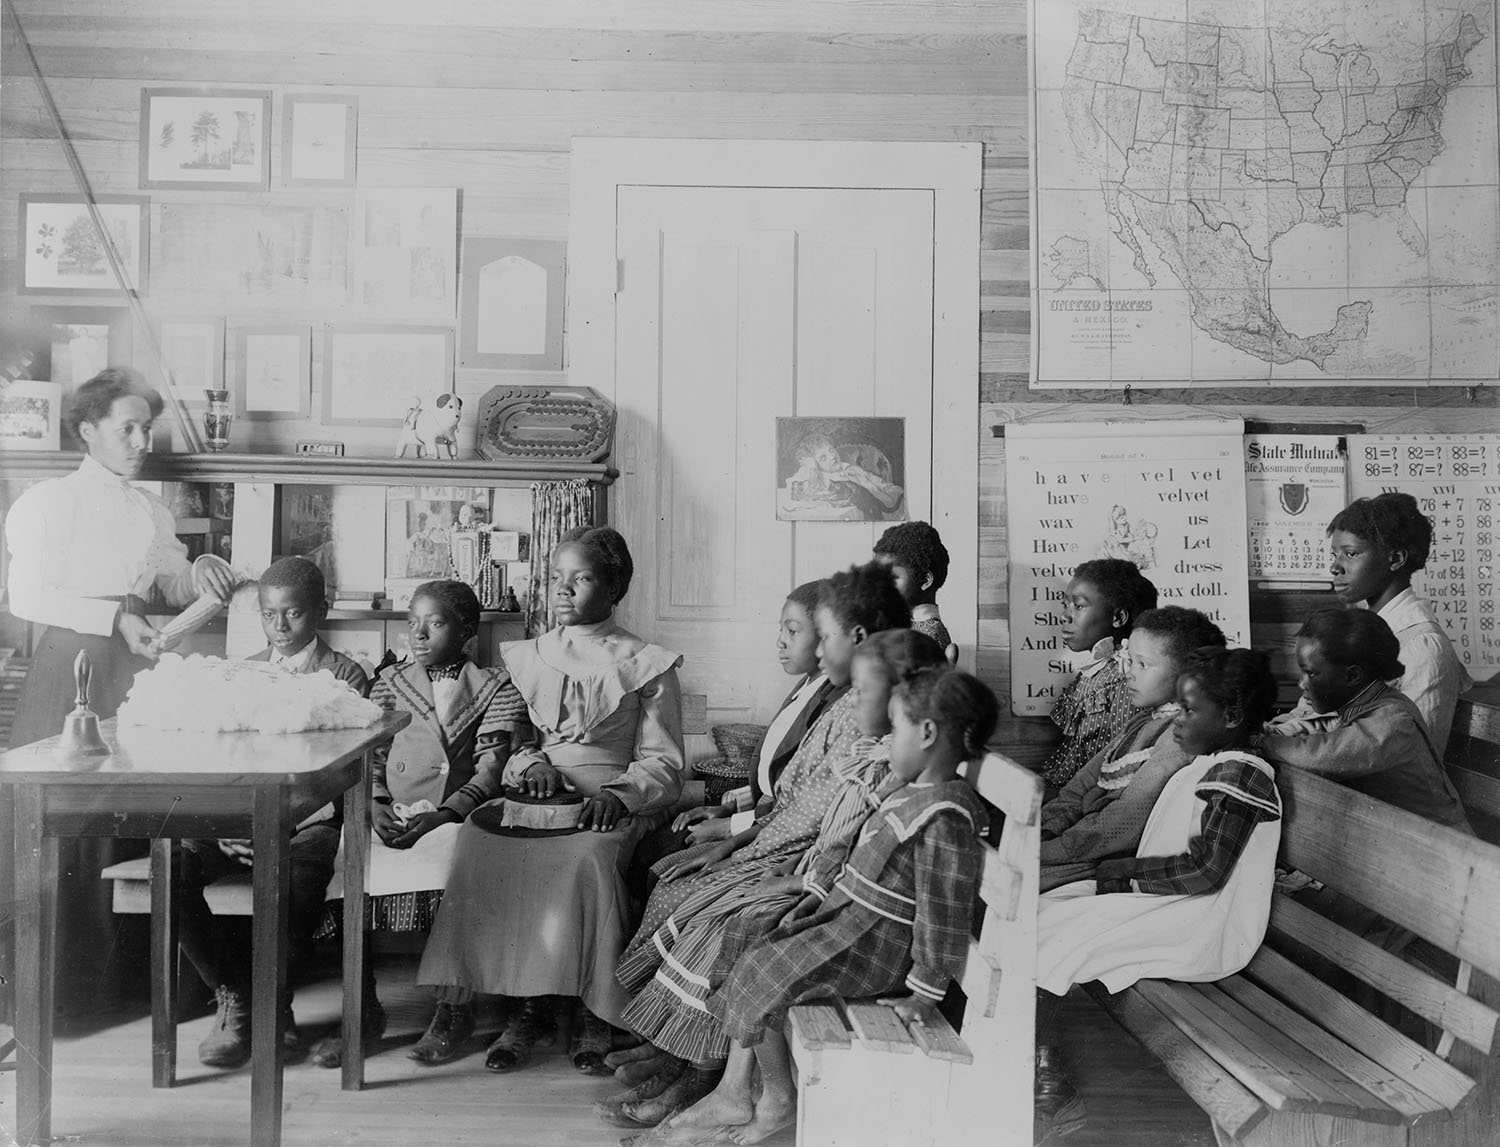 Photograph shows 
Young students in a classroom at the Tuskegee Normal and Industrial Institute